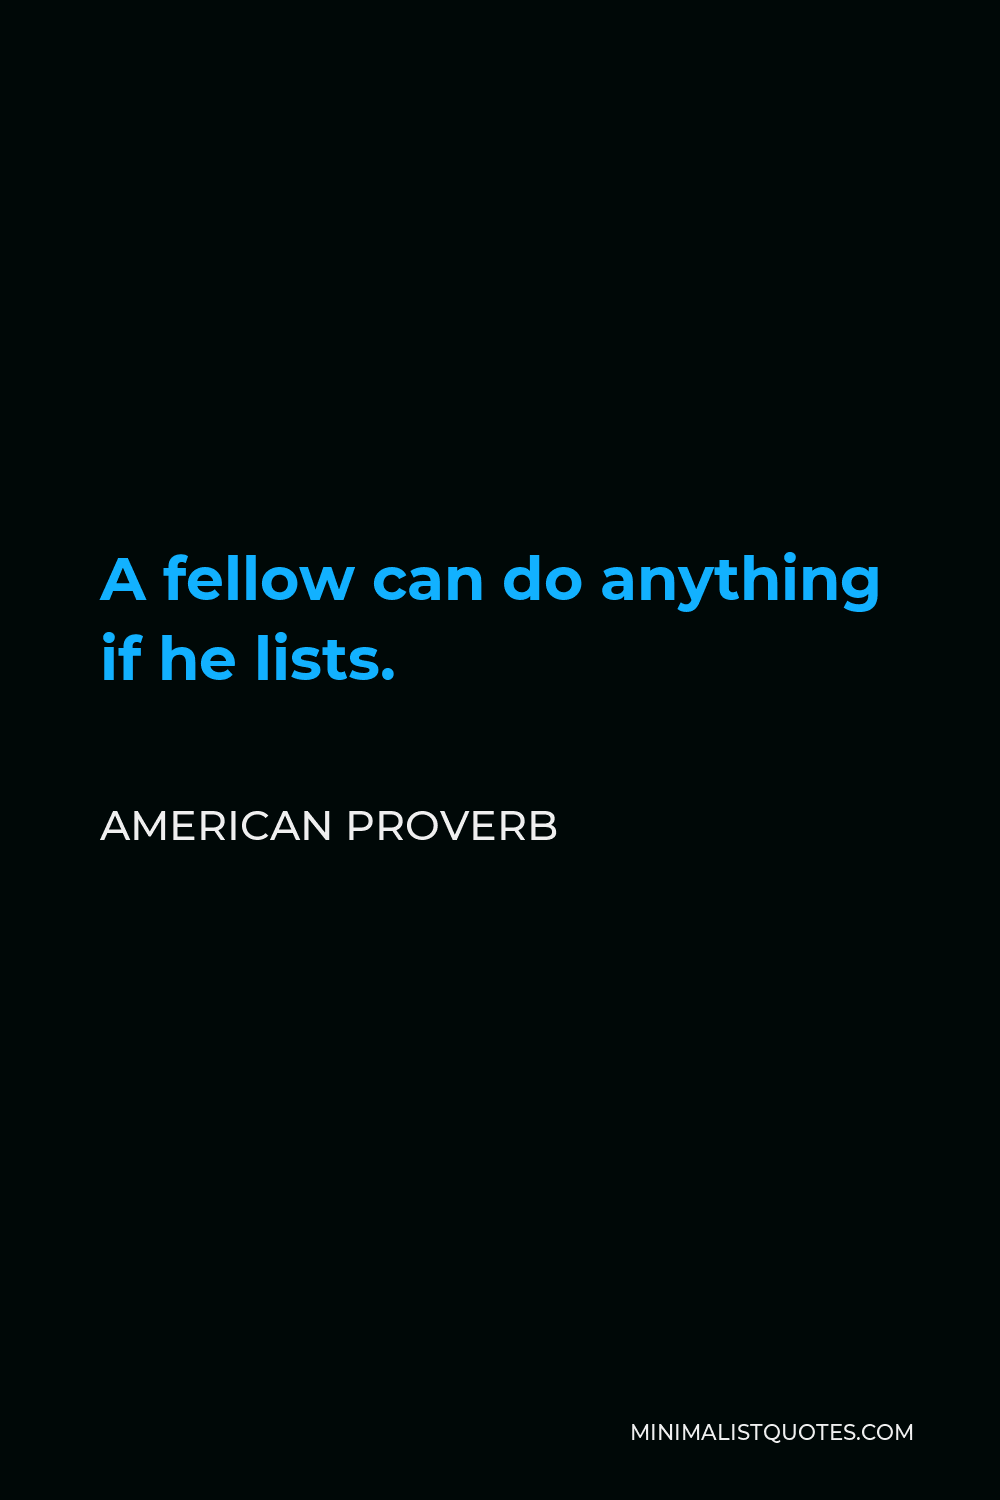 American Proverb Quote - A fellow can do anything if he lists.